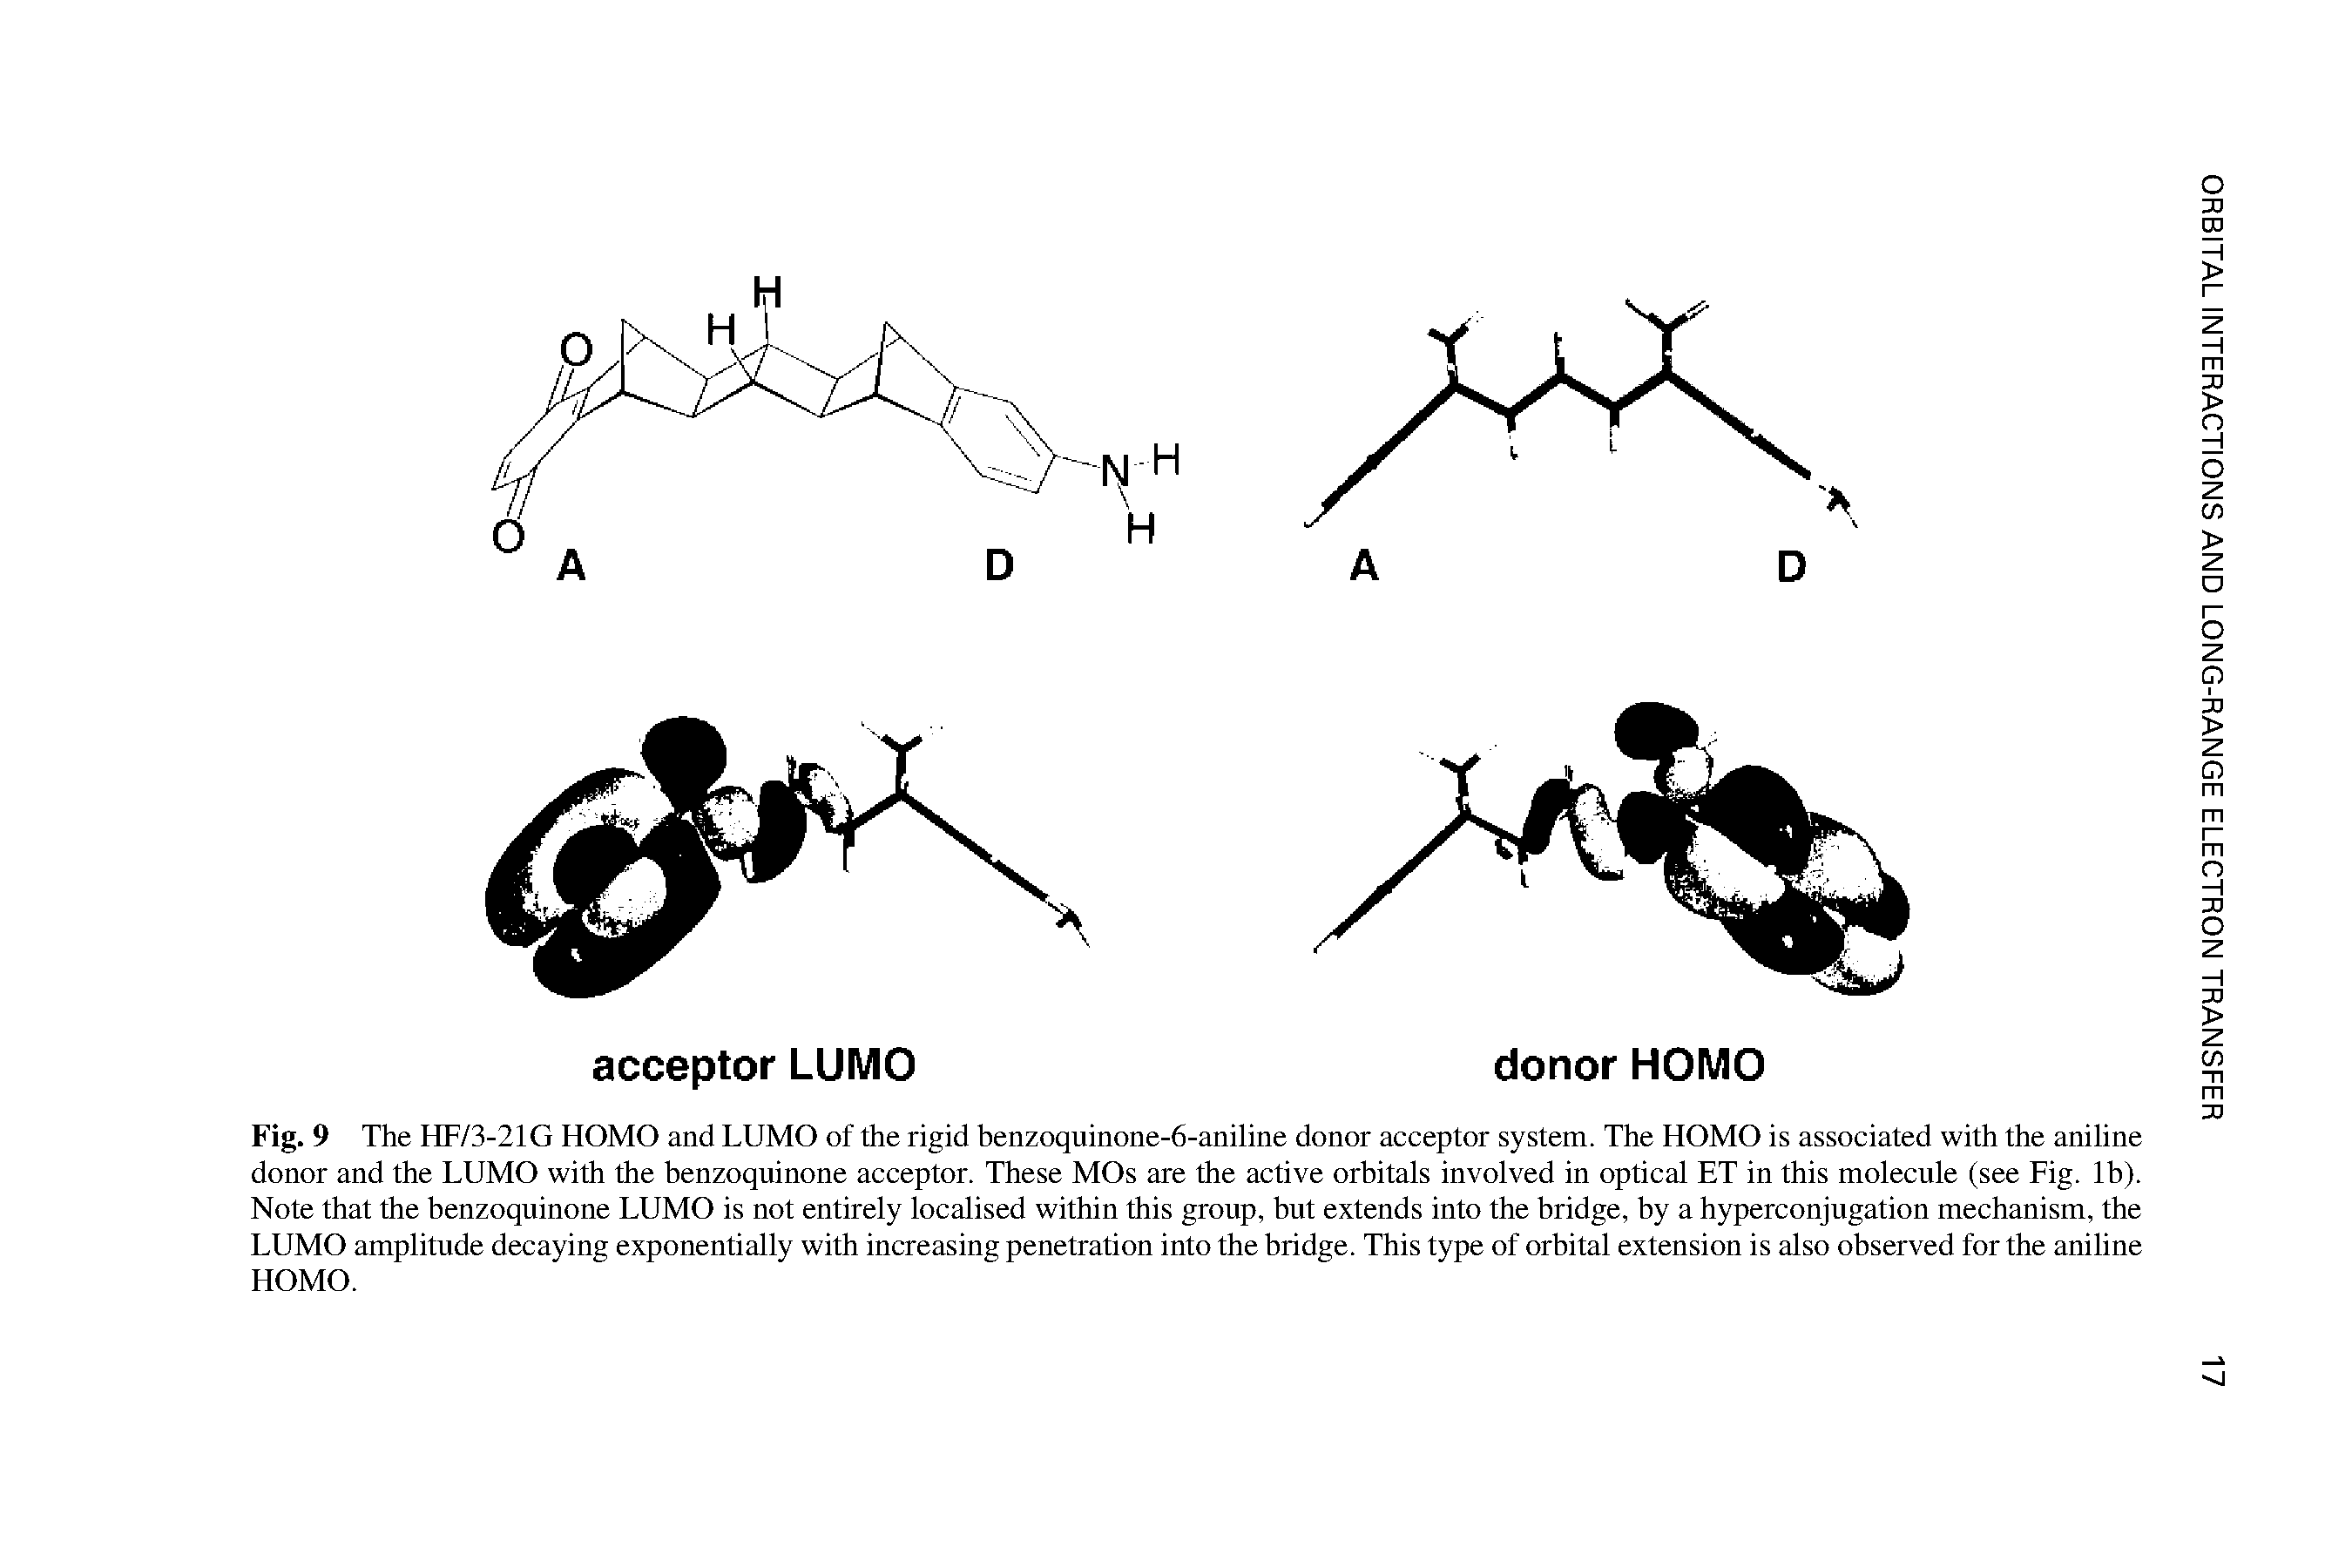 Fig. 9 The HF/3-21G HOMO and LUMO of the rigid benzoquinone-6-aniline donor acceptor system. The HOMO is associated with the aniline donor and the LUMO with the benzoquinone acceptor. These MOs are the active orbitals involved in optical ET in this molecule (see Fig. lb). Note that the benzoquinone LUMO is not entirely localised within this group, but extends into the bridge, by a hyperconjugation mechanism, the LUMO amplitude decaying exponentially with increasing penetration into the bridge. This type of orbital extension is also observed for the aniline HOMO.